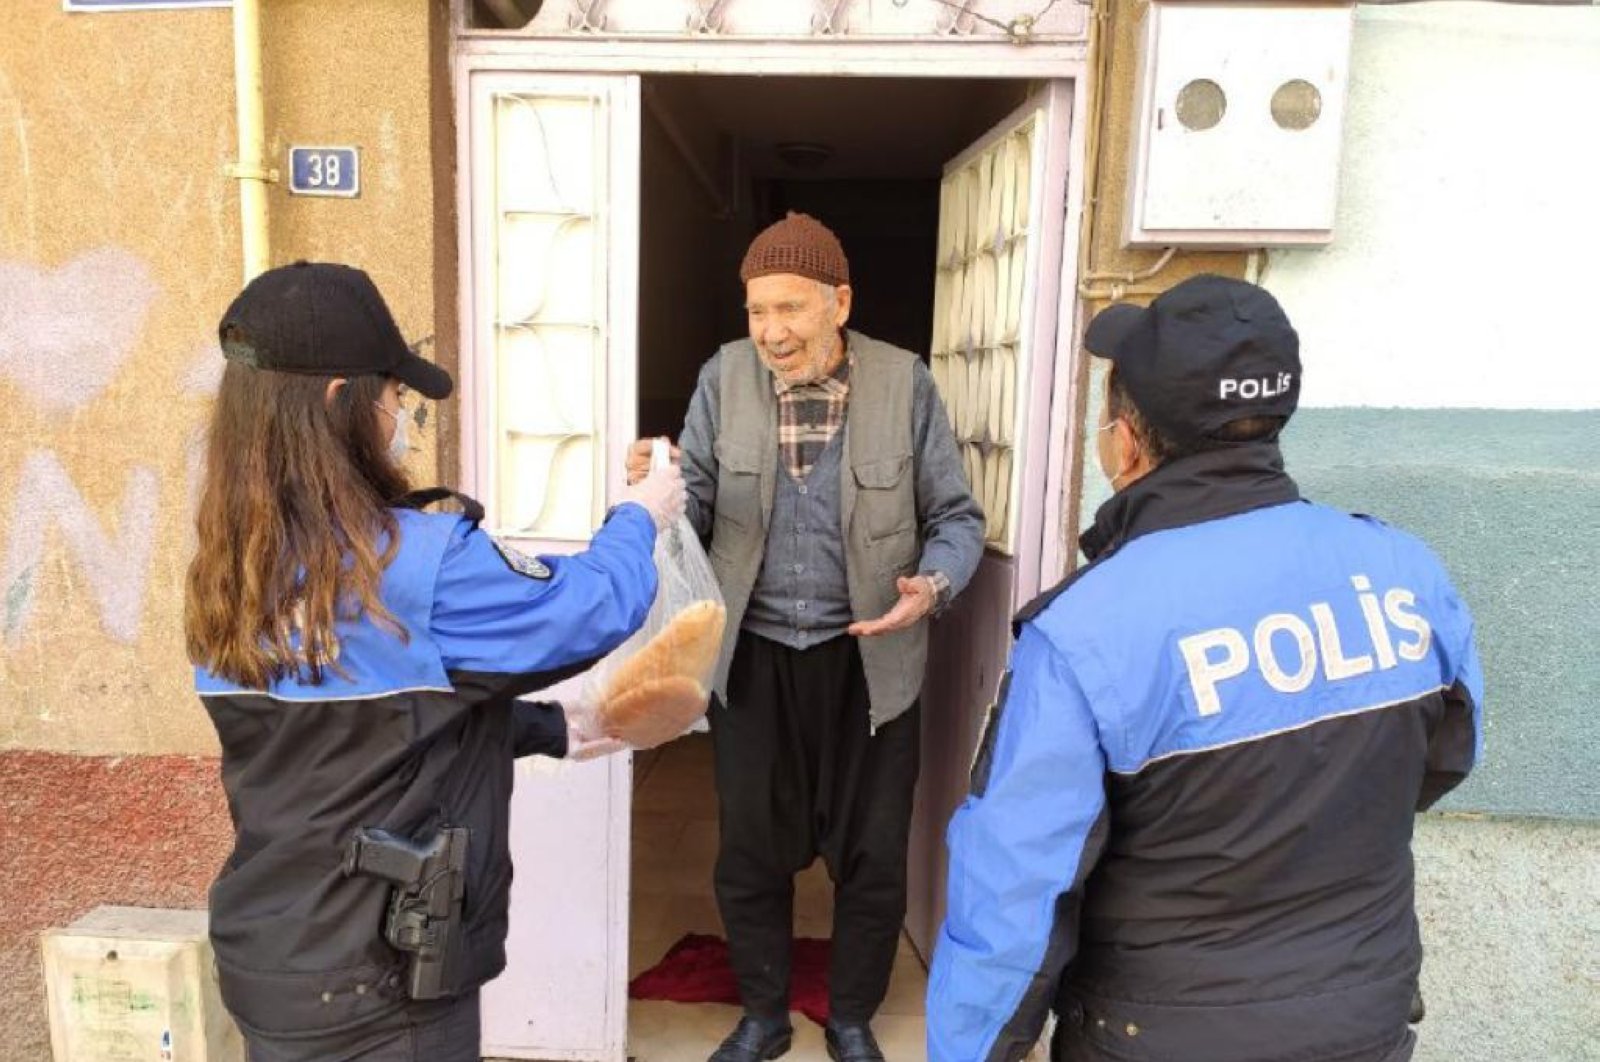 Police officers deliver bread to an elderly man in Gaziantep, Turkey, Wednesday, March 25, 2020. (AA Photo)